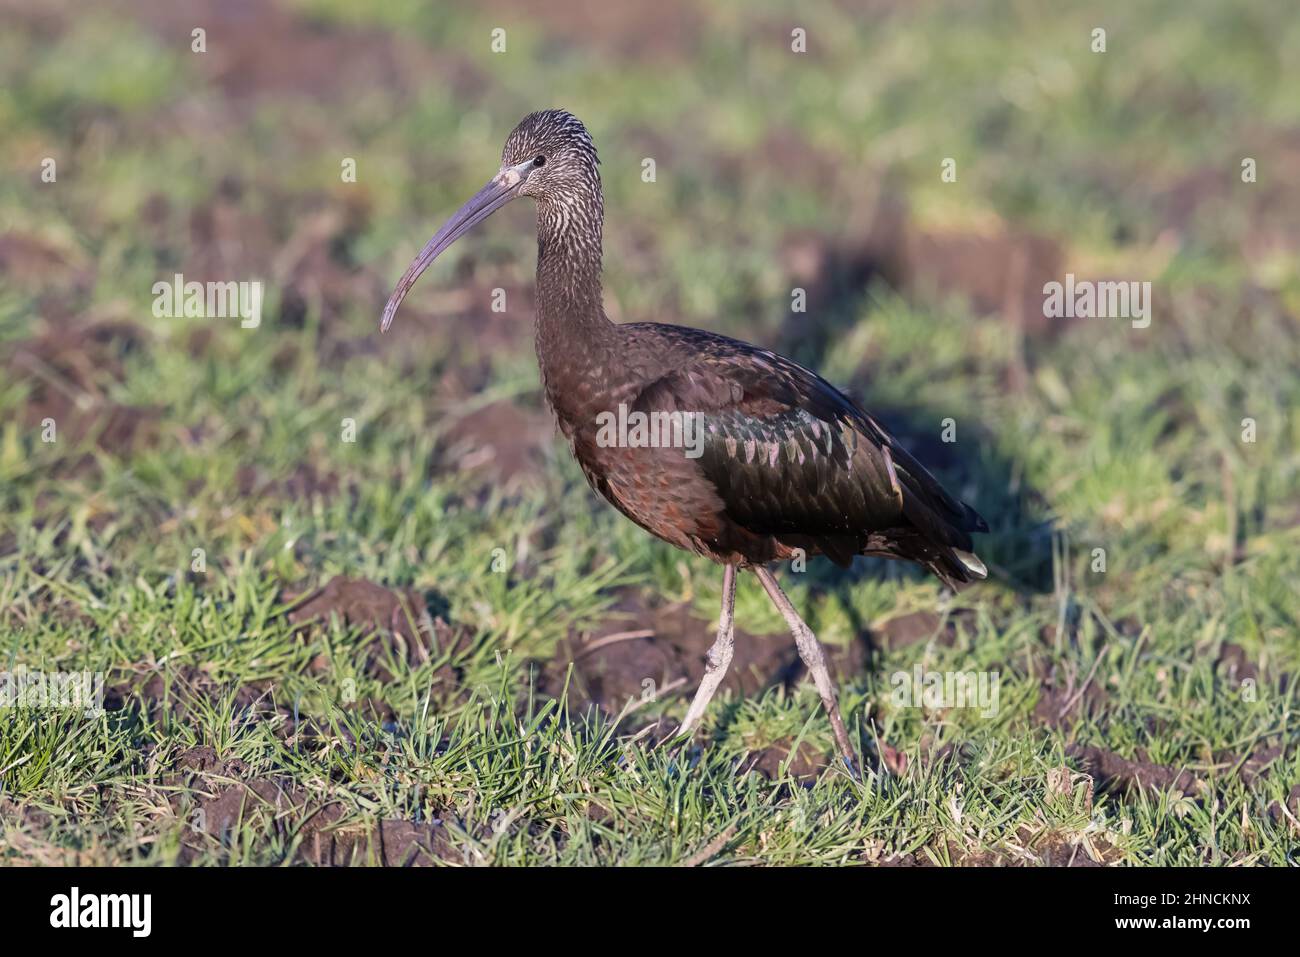 Glossy Ibis in a muddy field Stock Photo